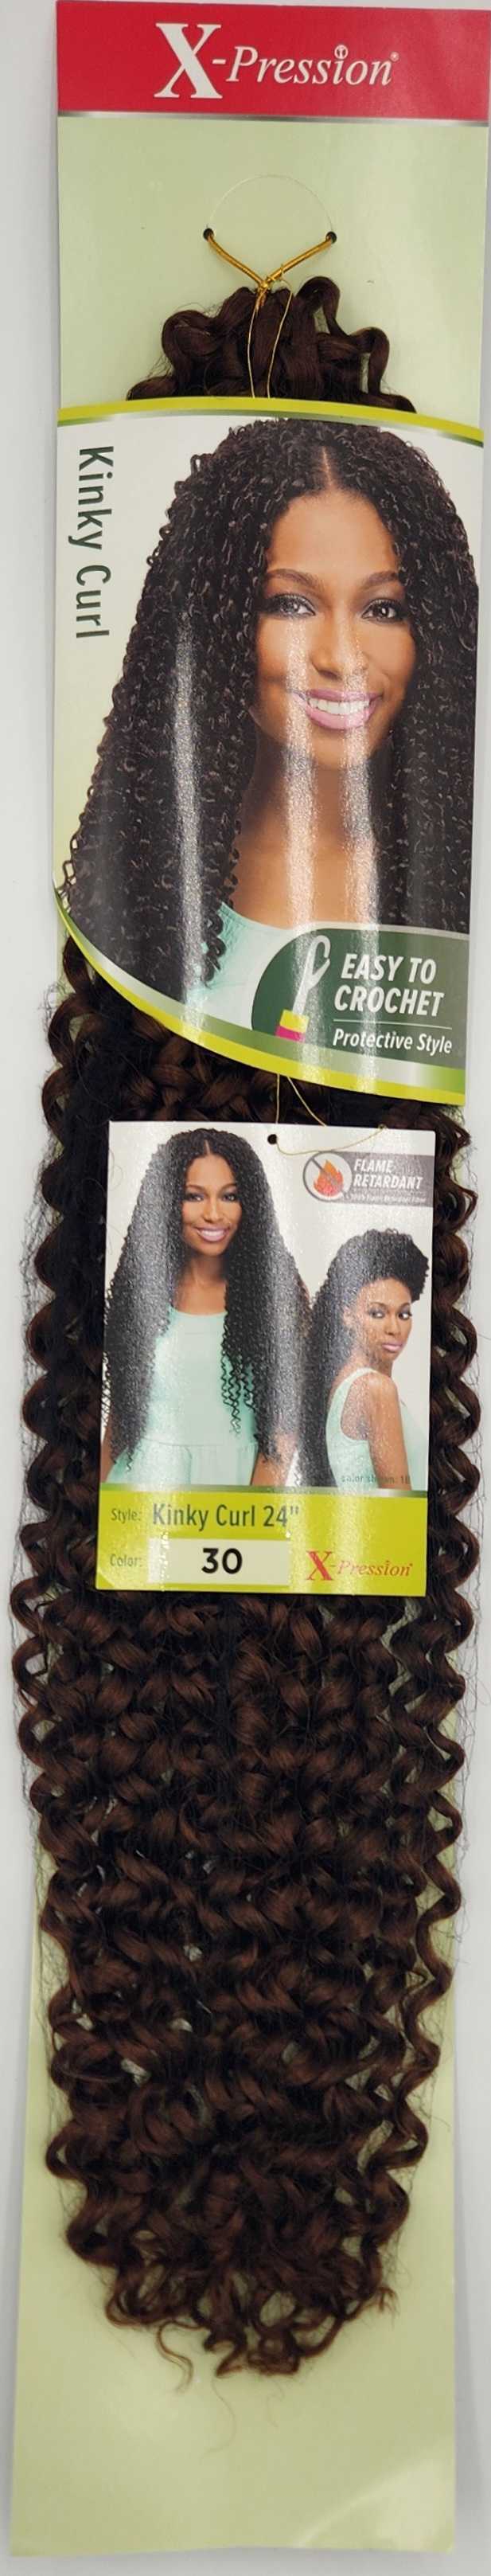 Outre X-Pression Kinky Curl 24" - Elevate Styles